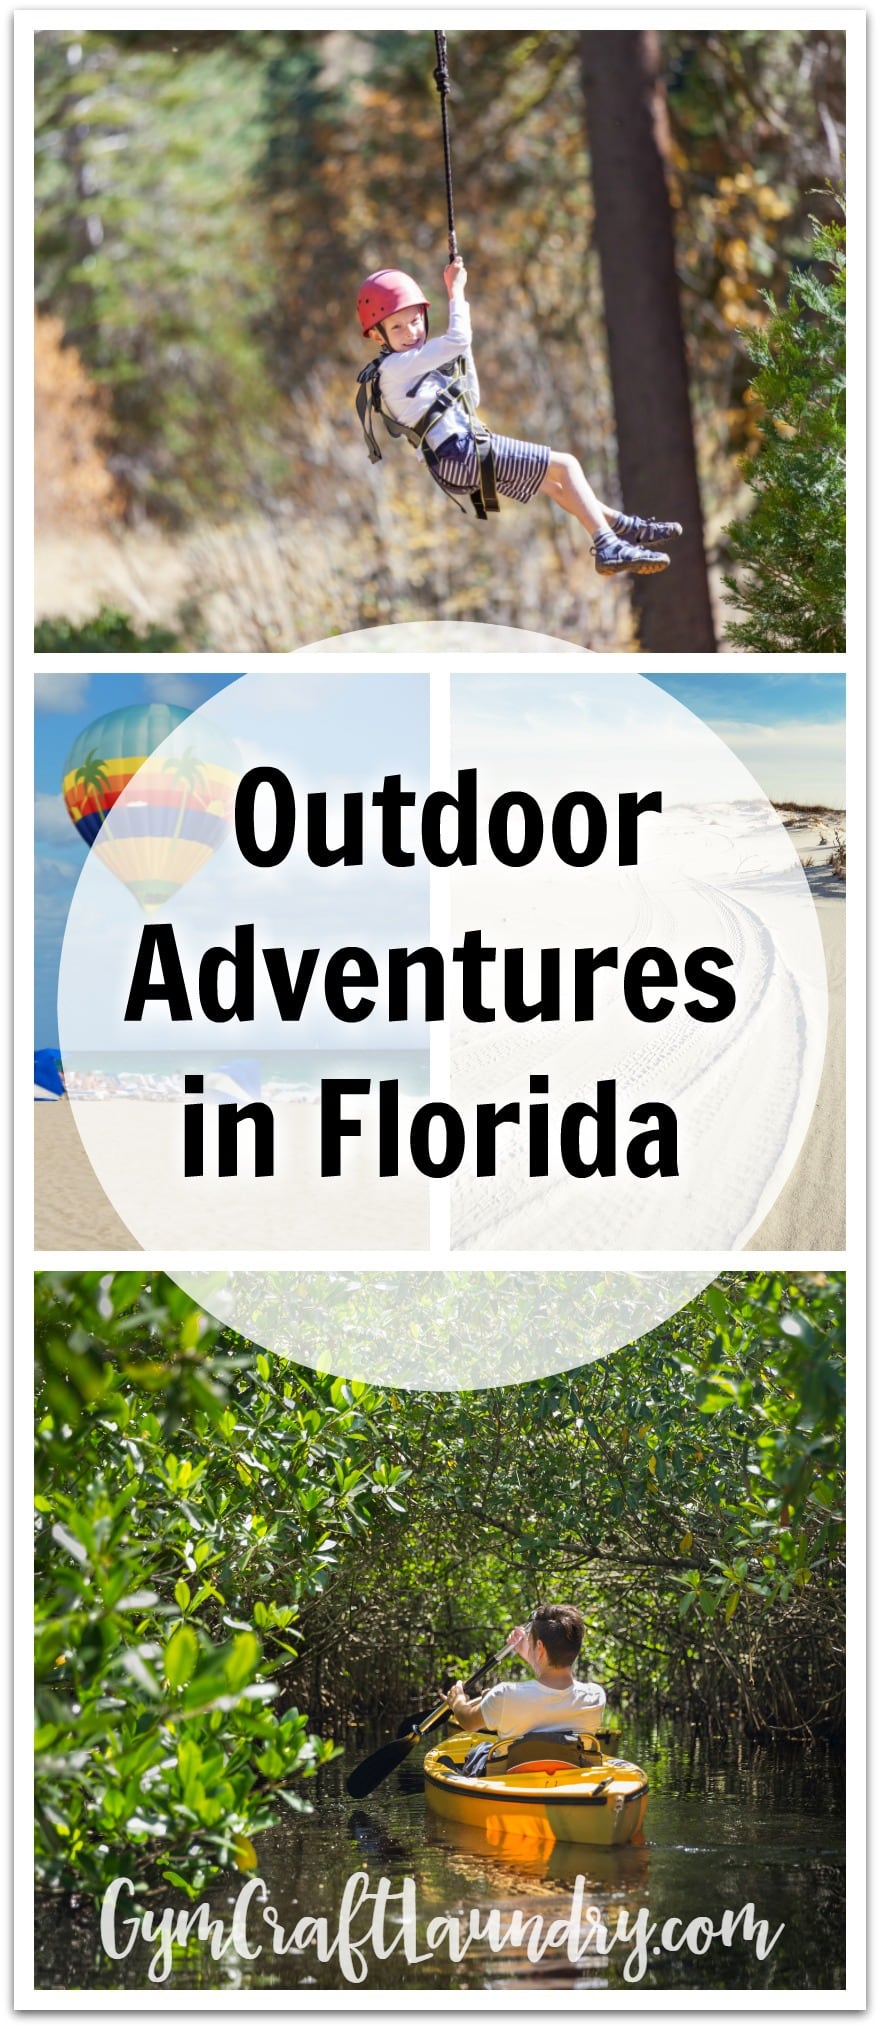 Outdoor Adventures in Florida to enjoy with your family.